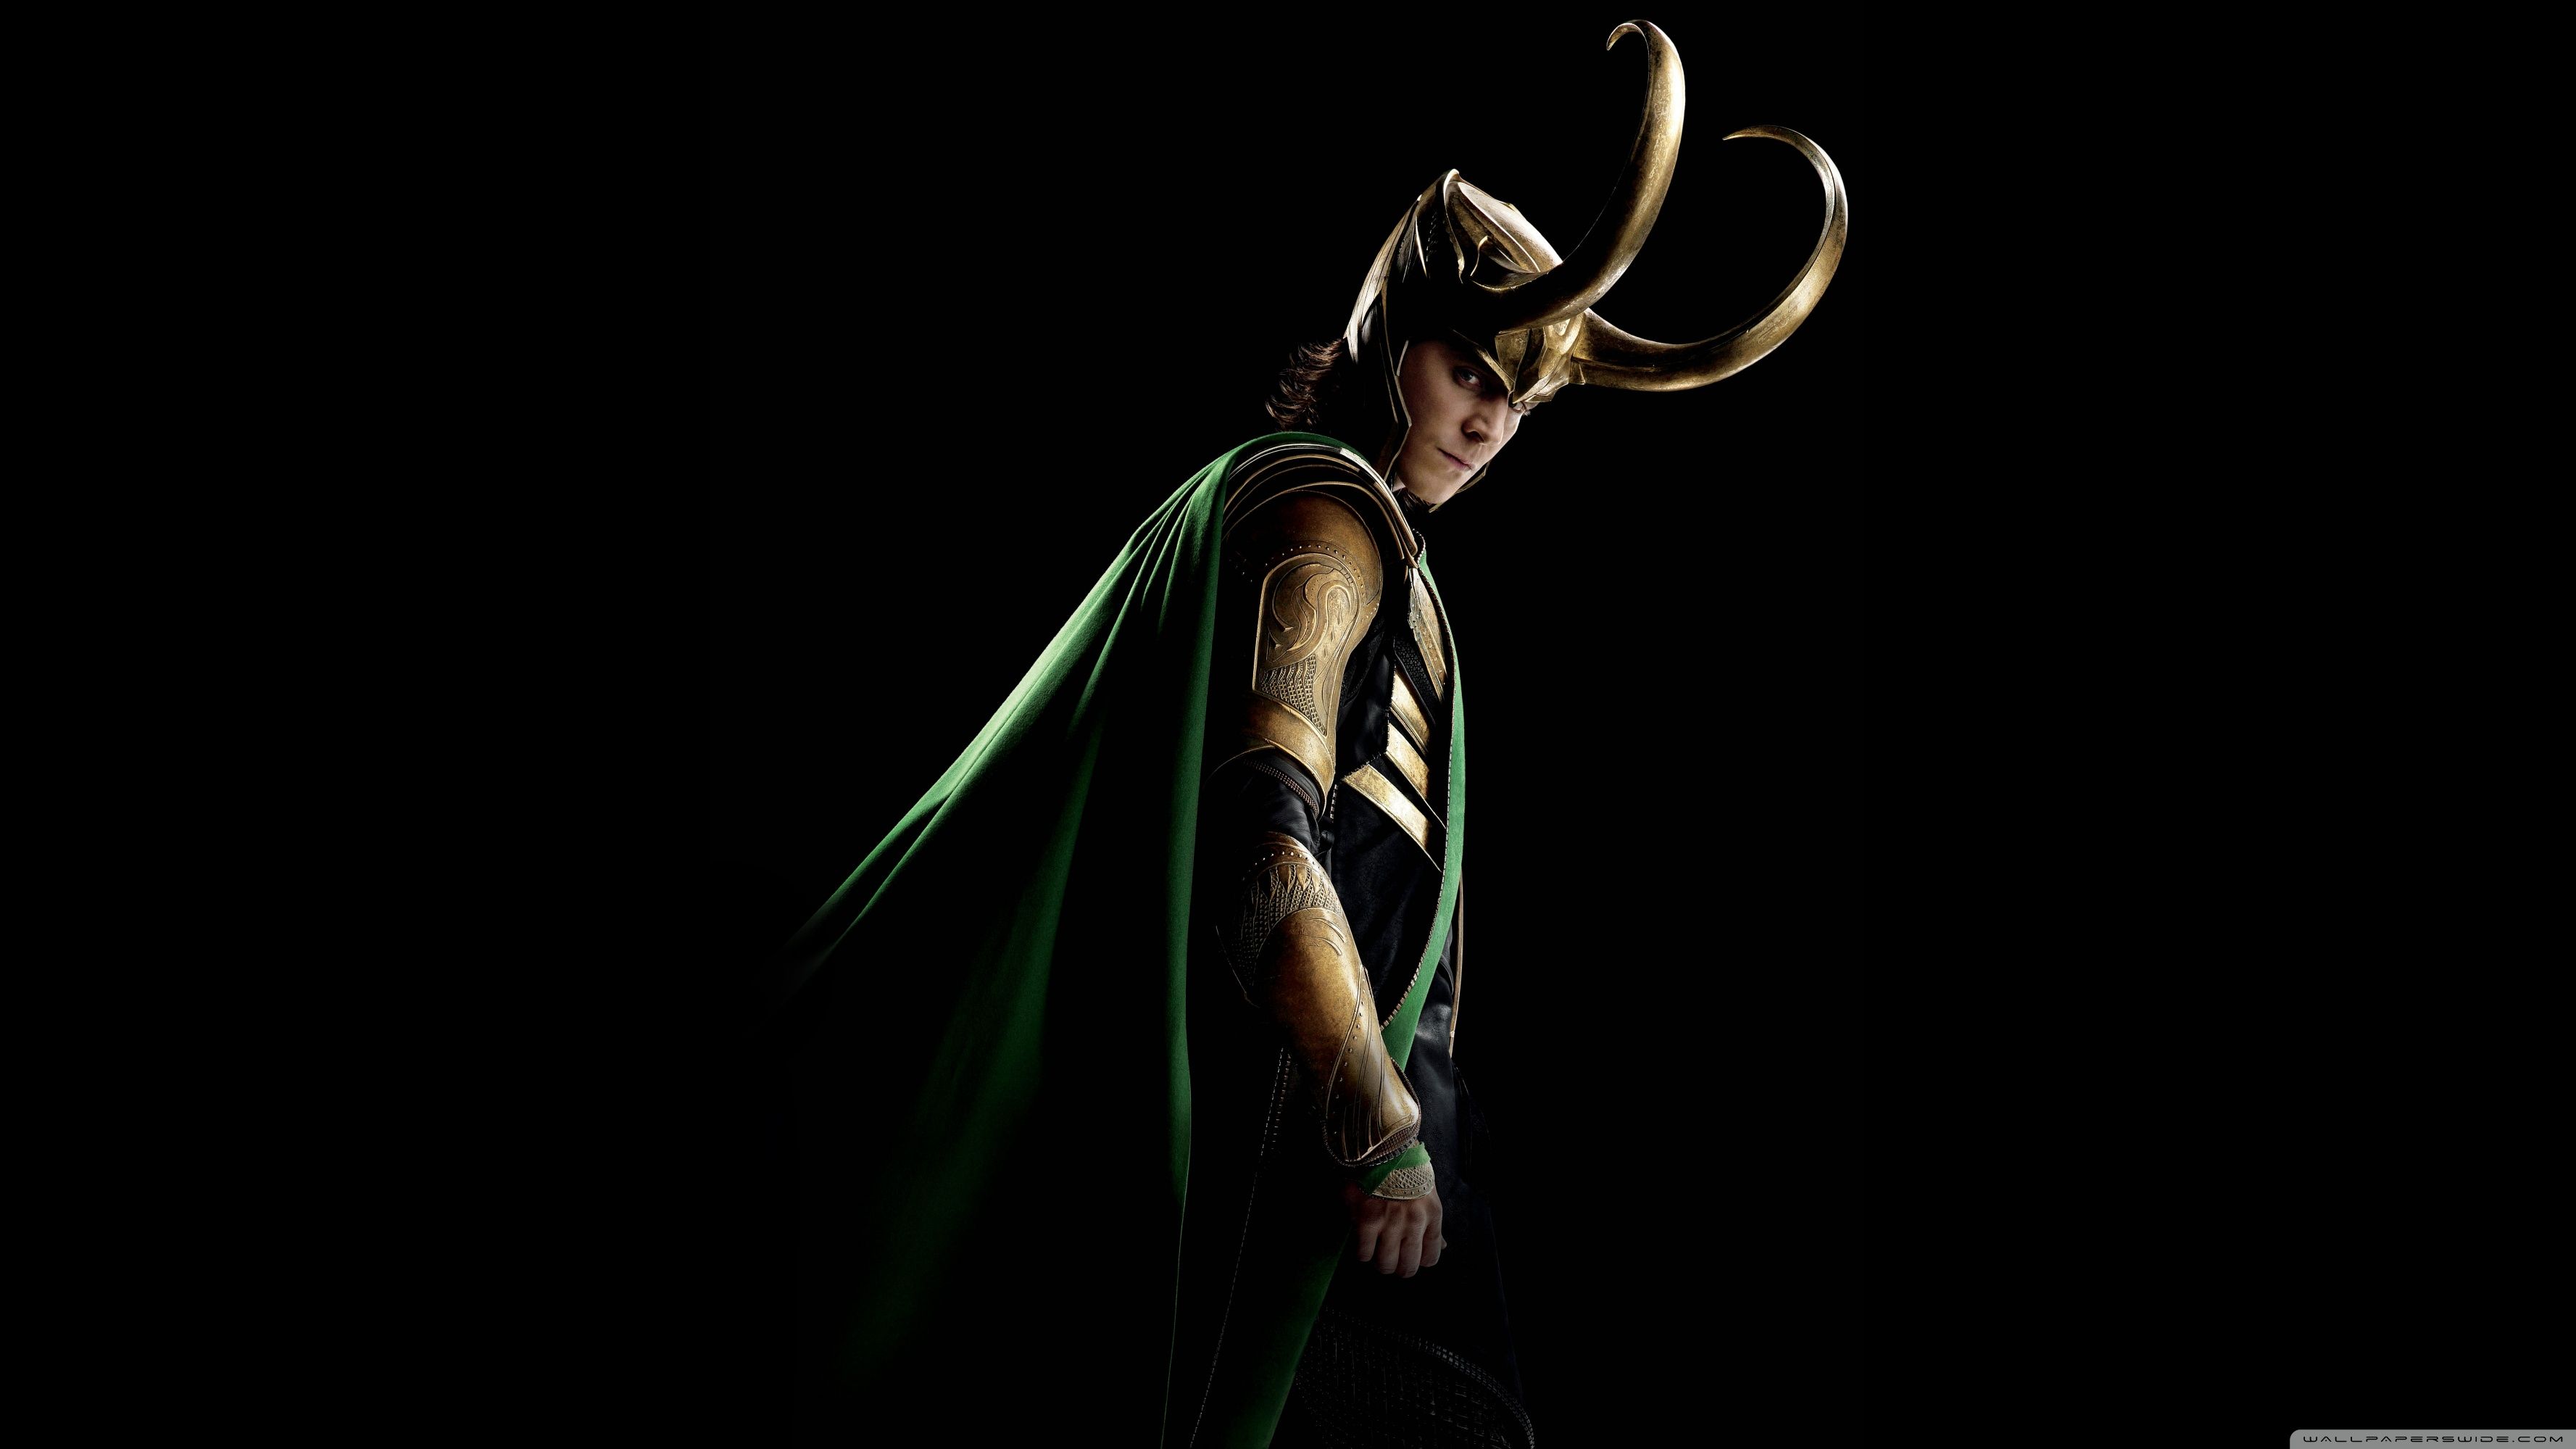 Loki Wallpaper for mobile phone, tablet, desktop computer and other devices  HD and 4K wallpapers.